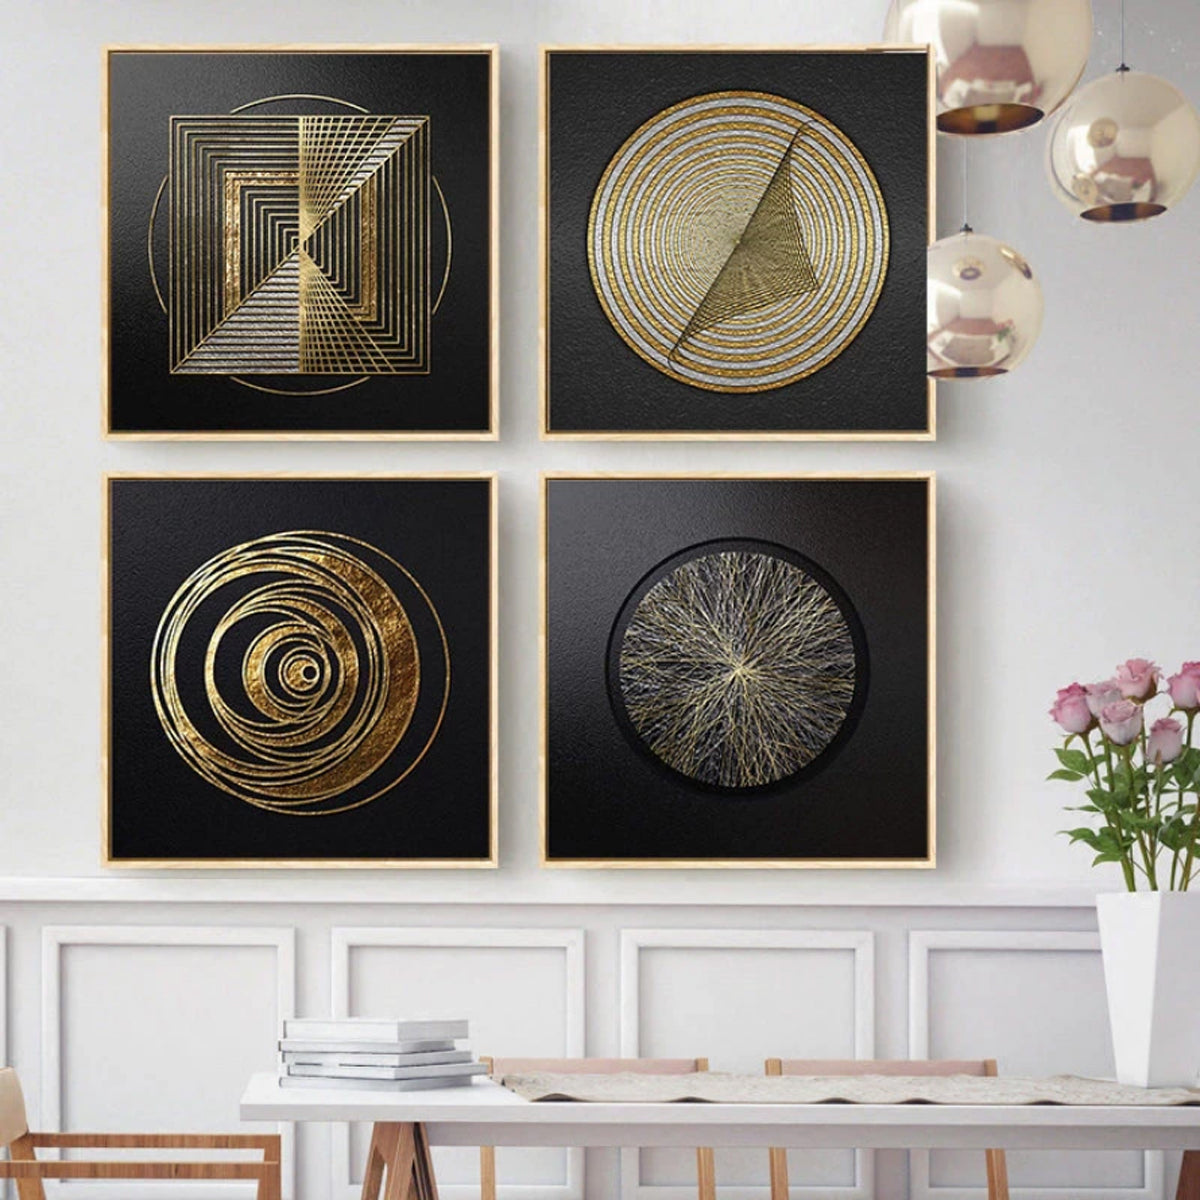 TPFLiving art print on canvas Traumpreisfabrik 6 in / gold black – si abstract 5 motifs 